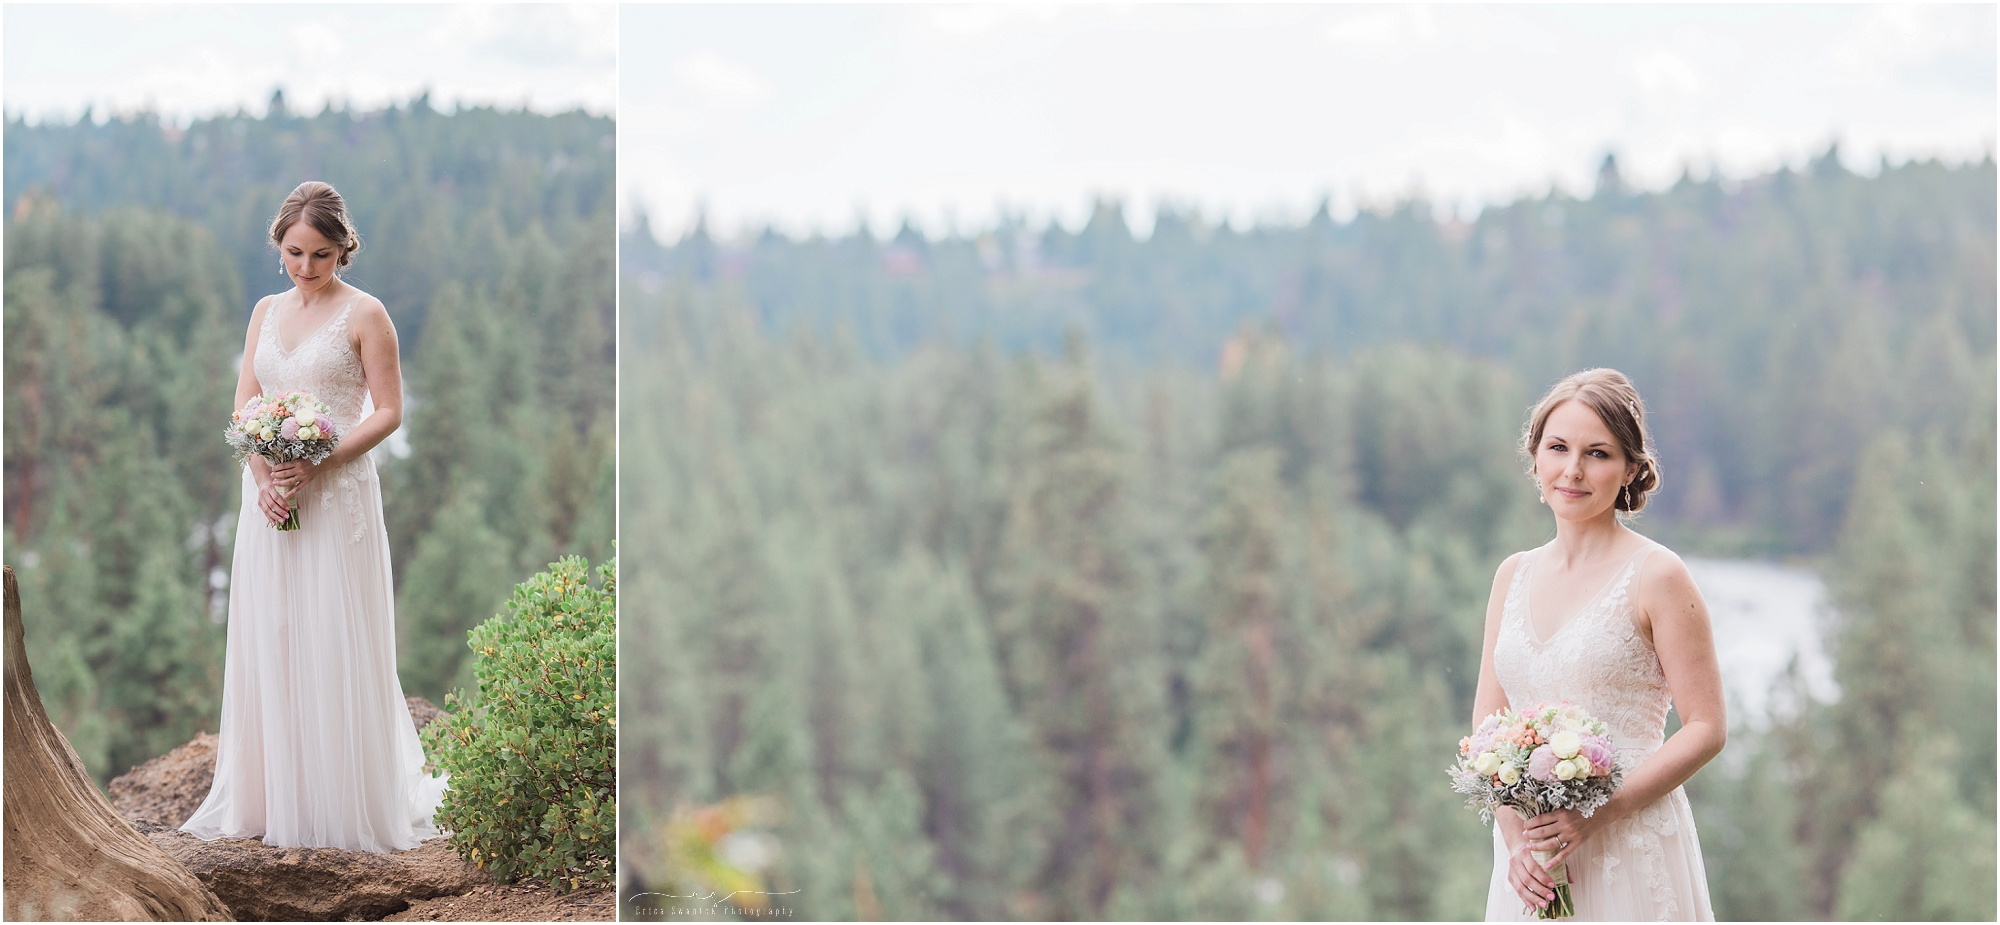 An absolutely breathtaking bridal portrait for this intimate outdoor Oregon wedding in Bend. 